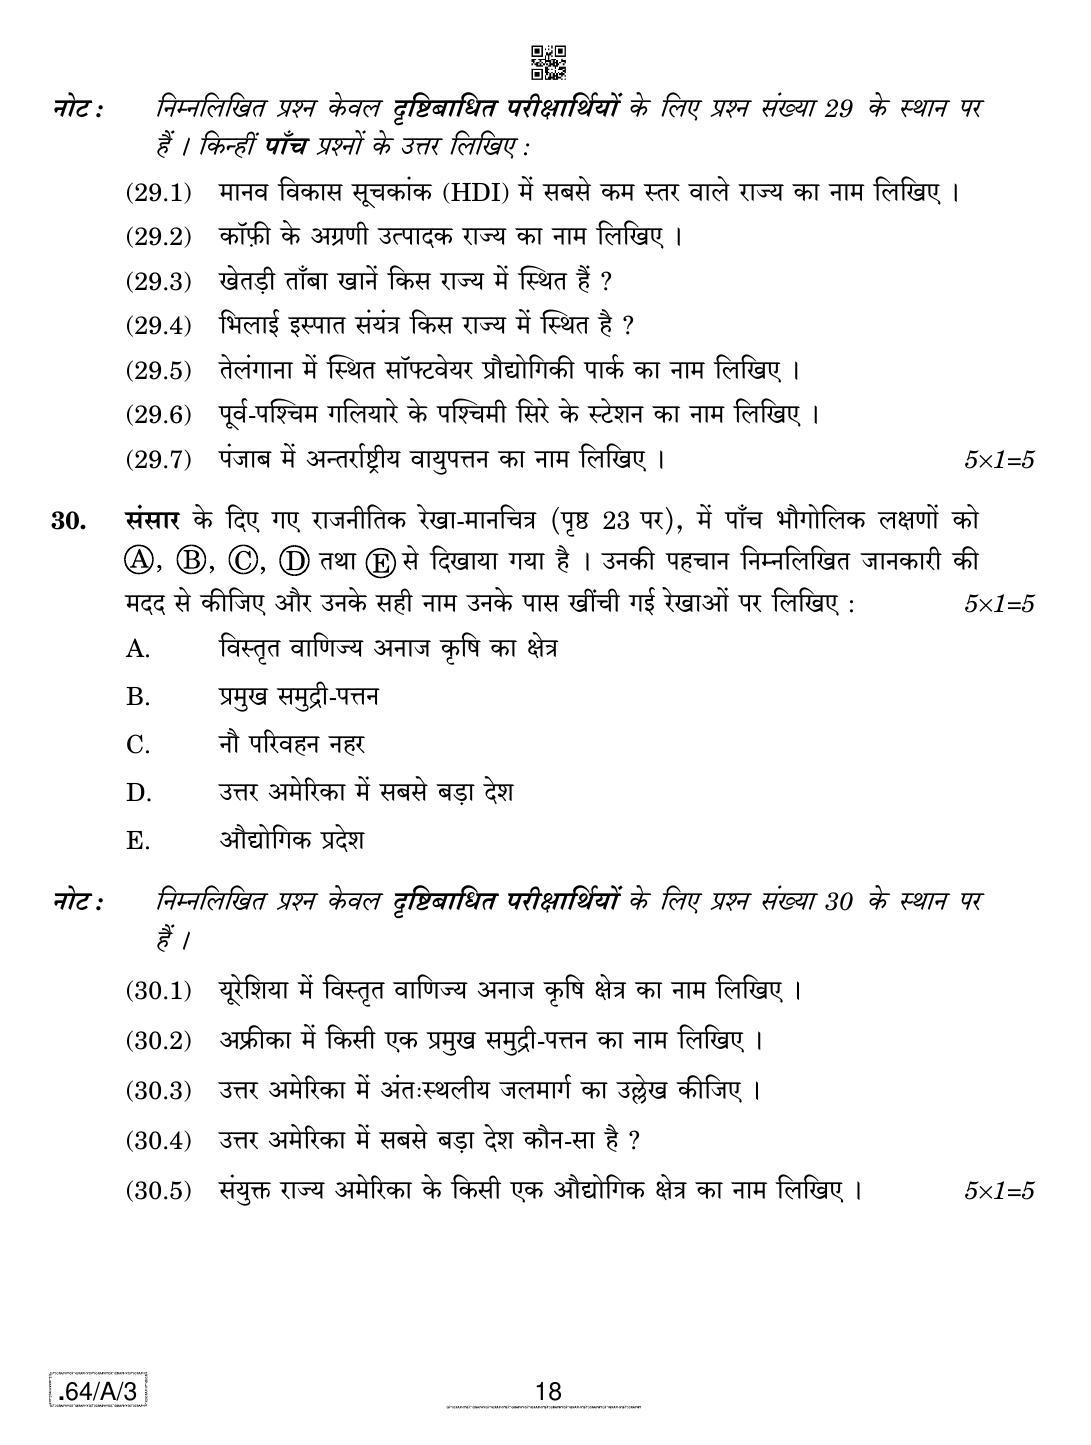 CBSE Class 12 64-C-3 - Geography 2020 Compartment Question Paper - Page 18